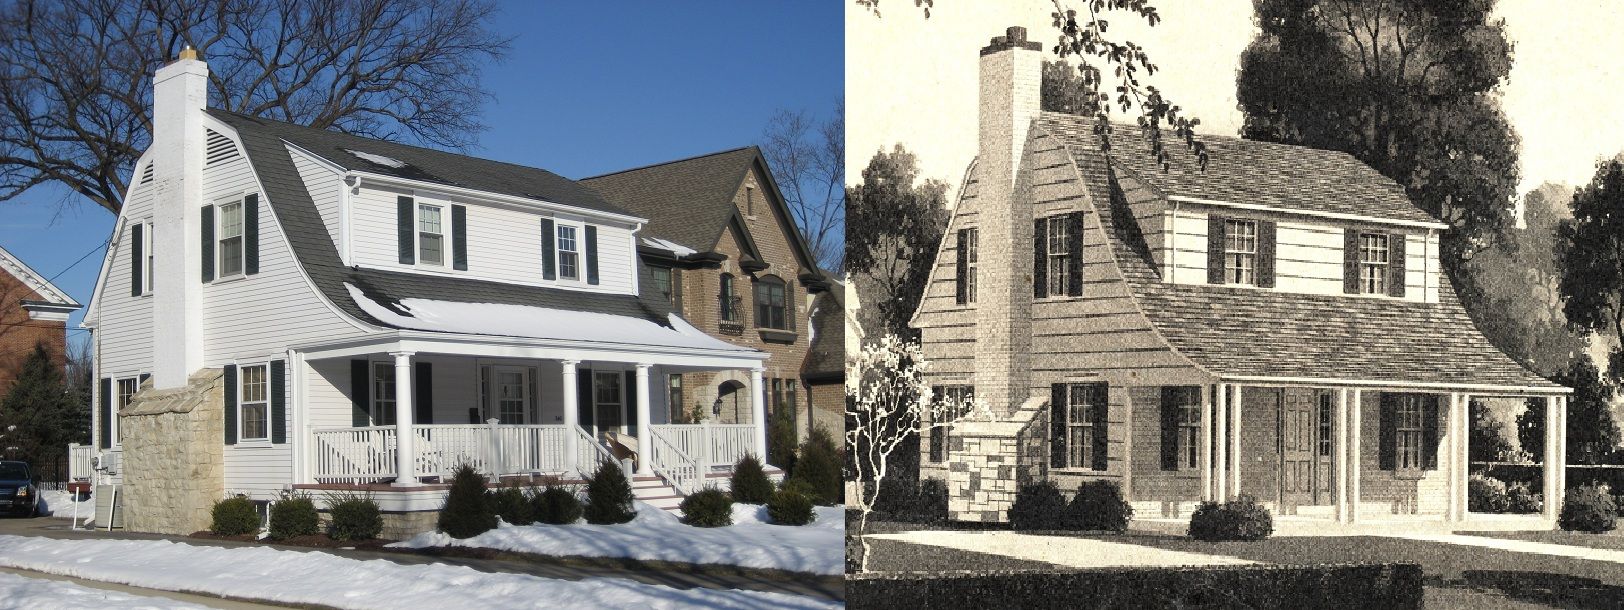 And heres a picture of a real Newbury (Elmhurst, IL) shown next to the catalog image. Youll notice that the house in Elmhurst actually looks like the catalog picture!